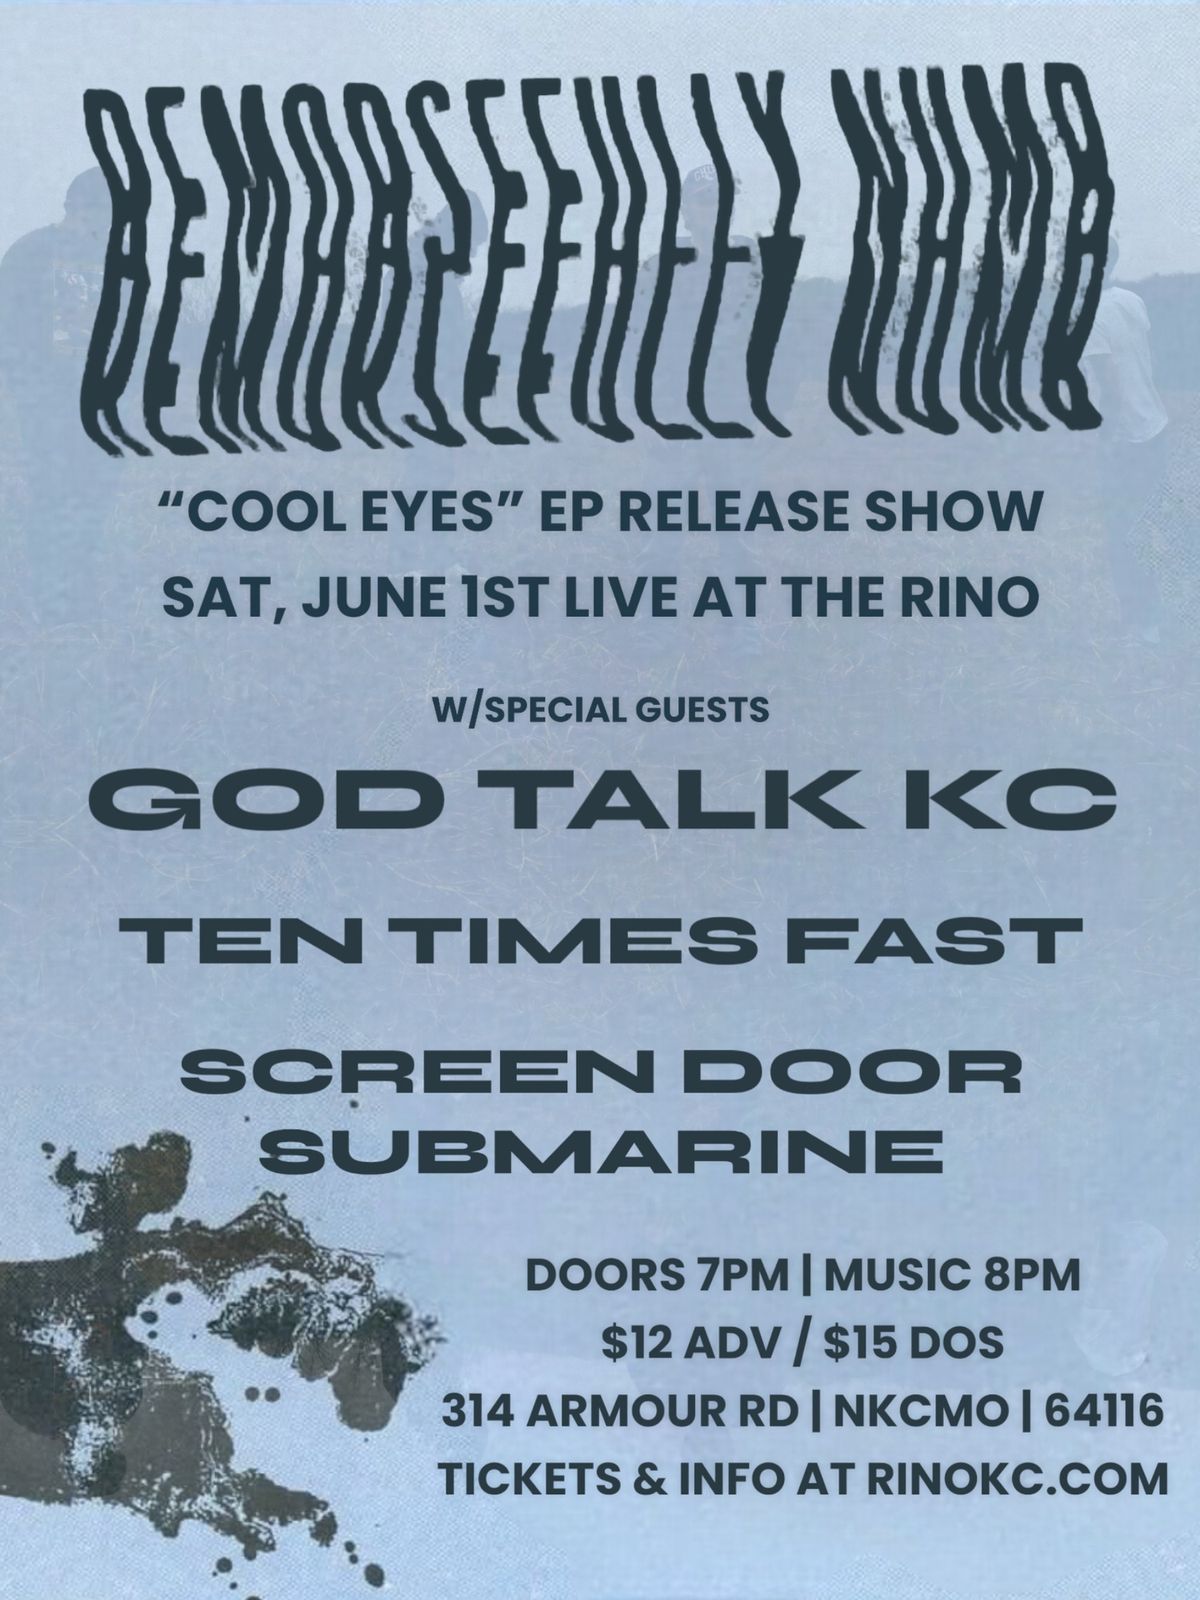 REMORSEFULLY NUMB "COOL EYES" EP RELEASE SHOW